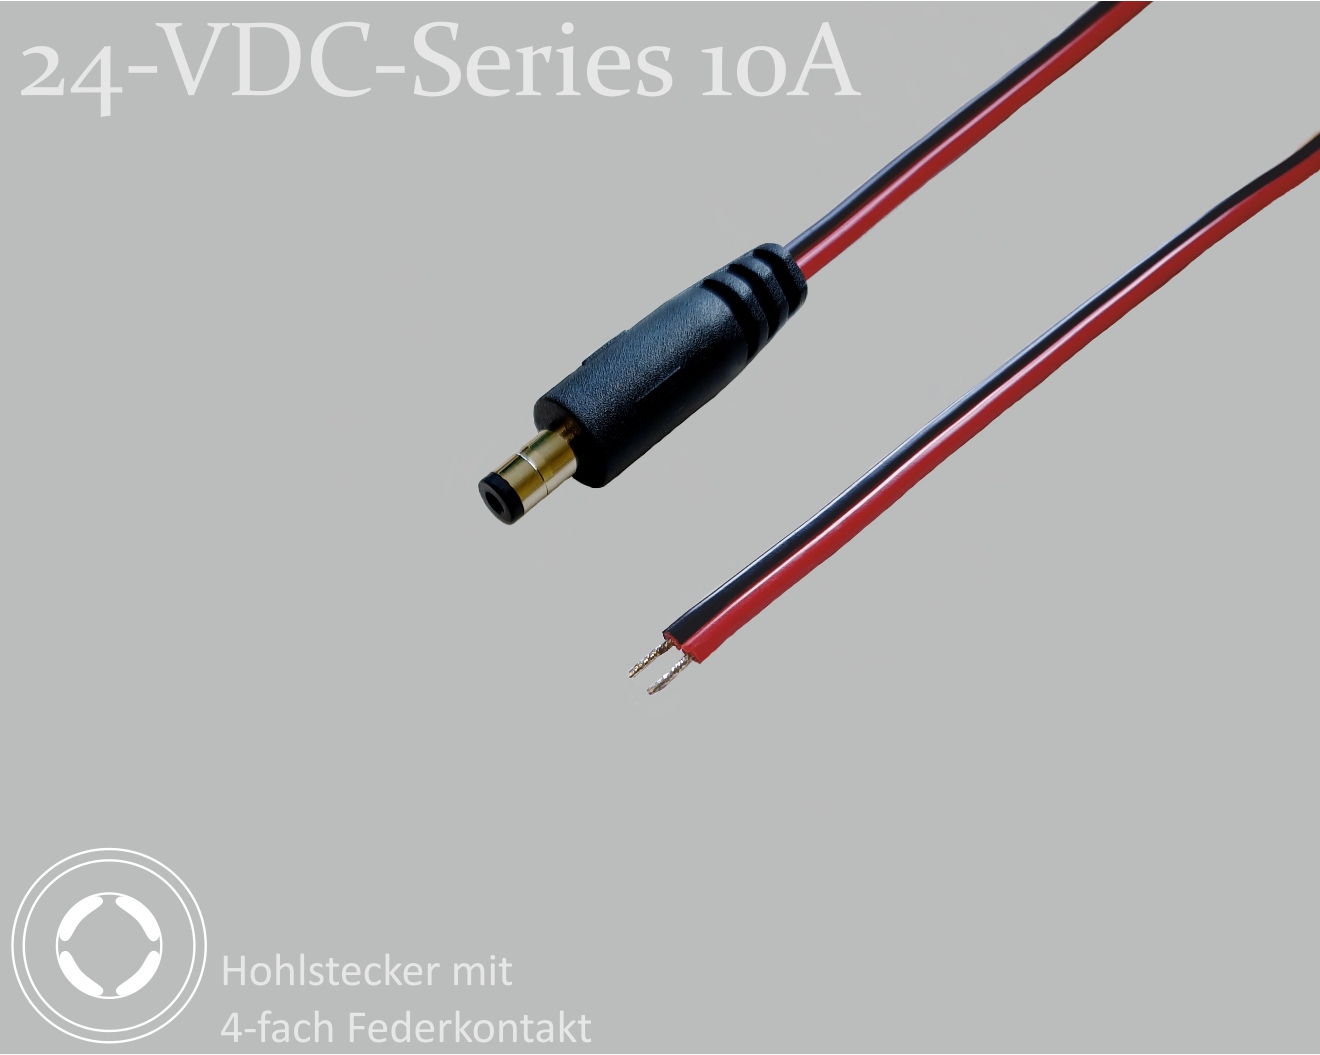 24-VDC-Series 10A, DC connection cable, DC plug with 4-spring contact 2.1x5.5x9.5mm, flat cable 2x0.75mm², red/black, tinned ends, 0.75m